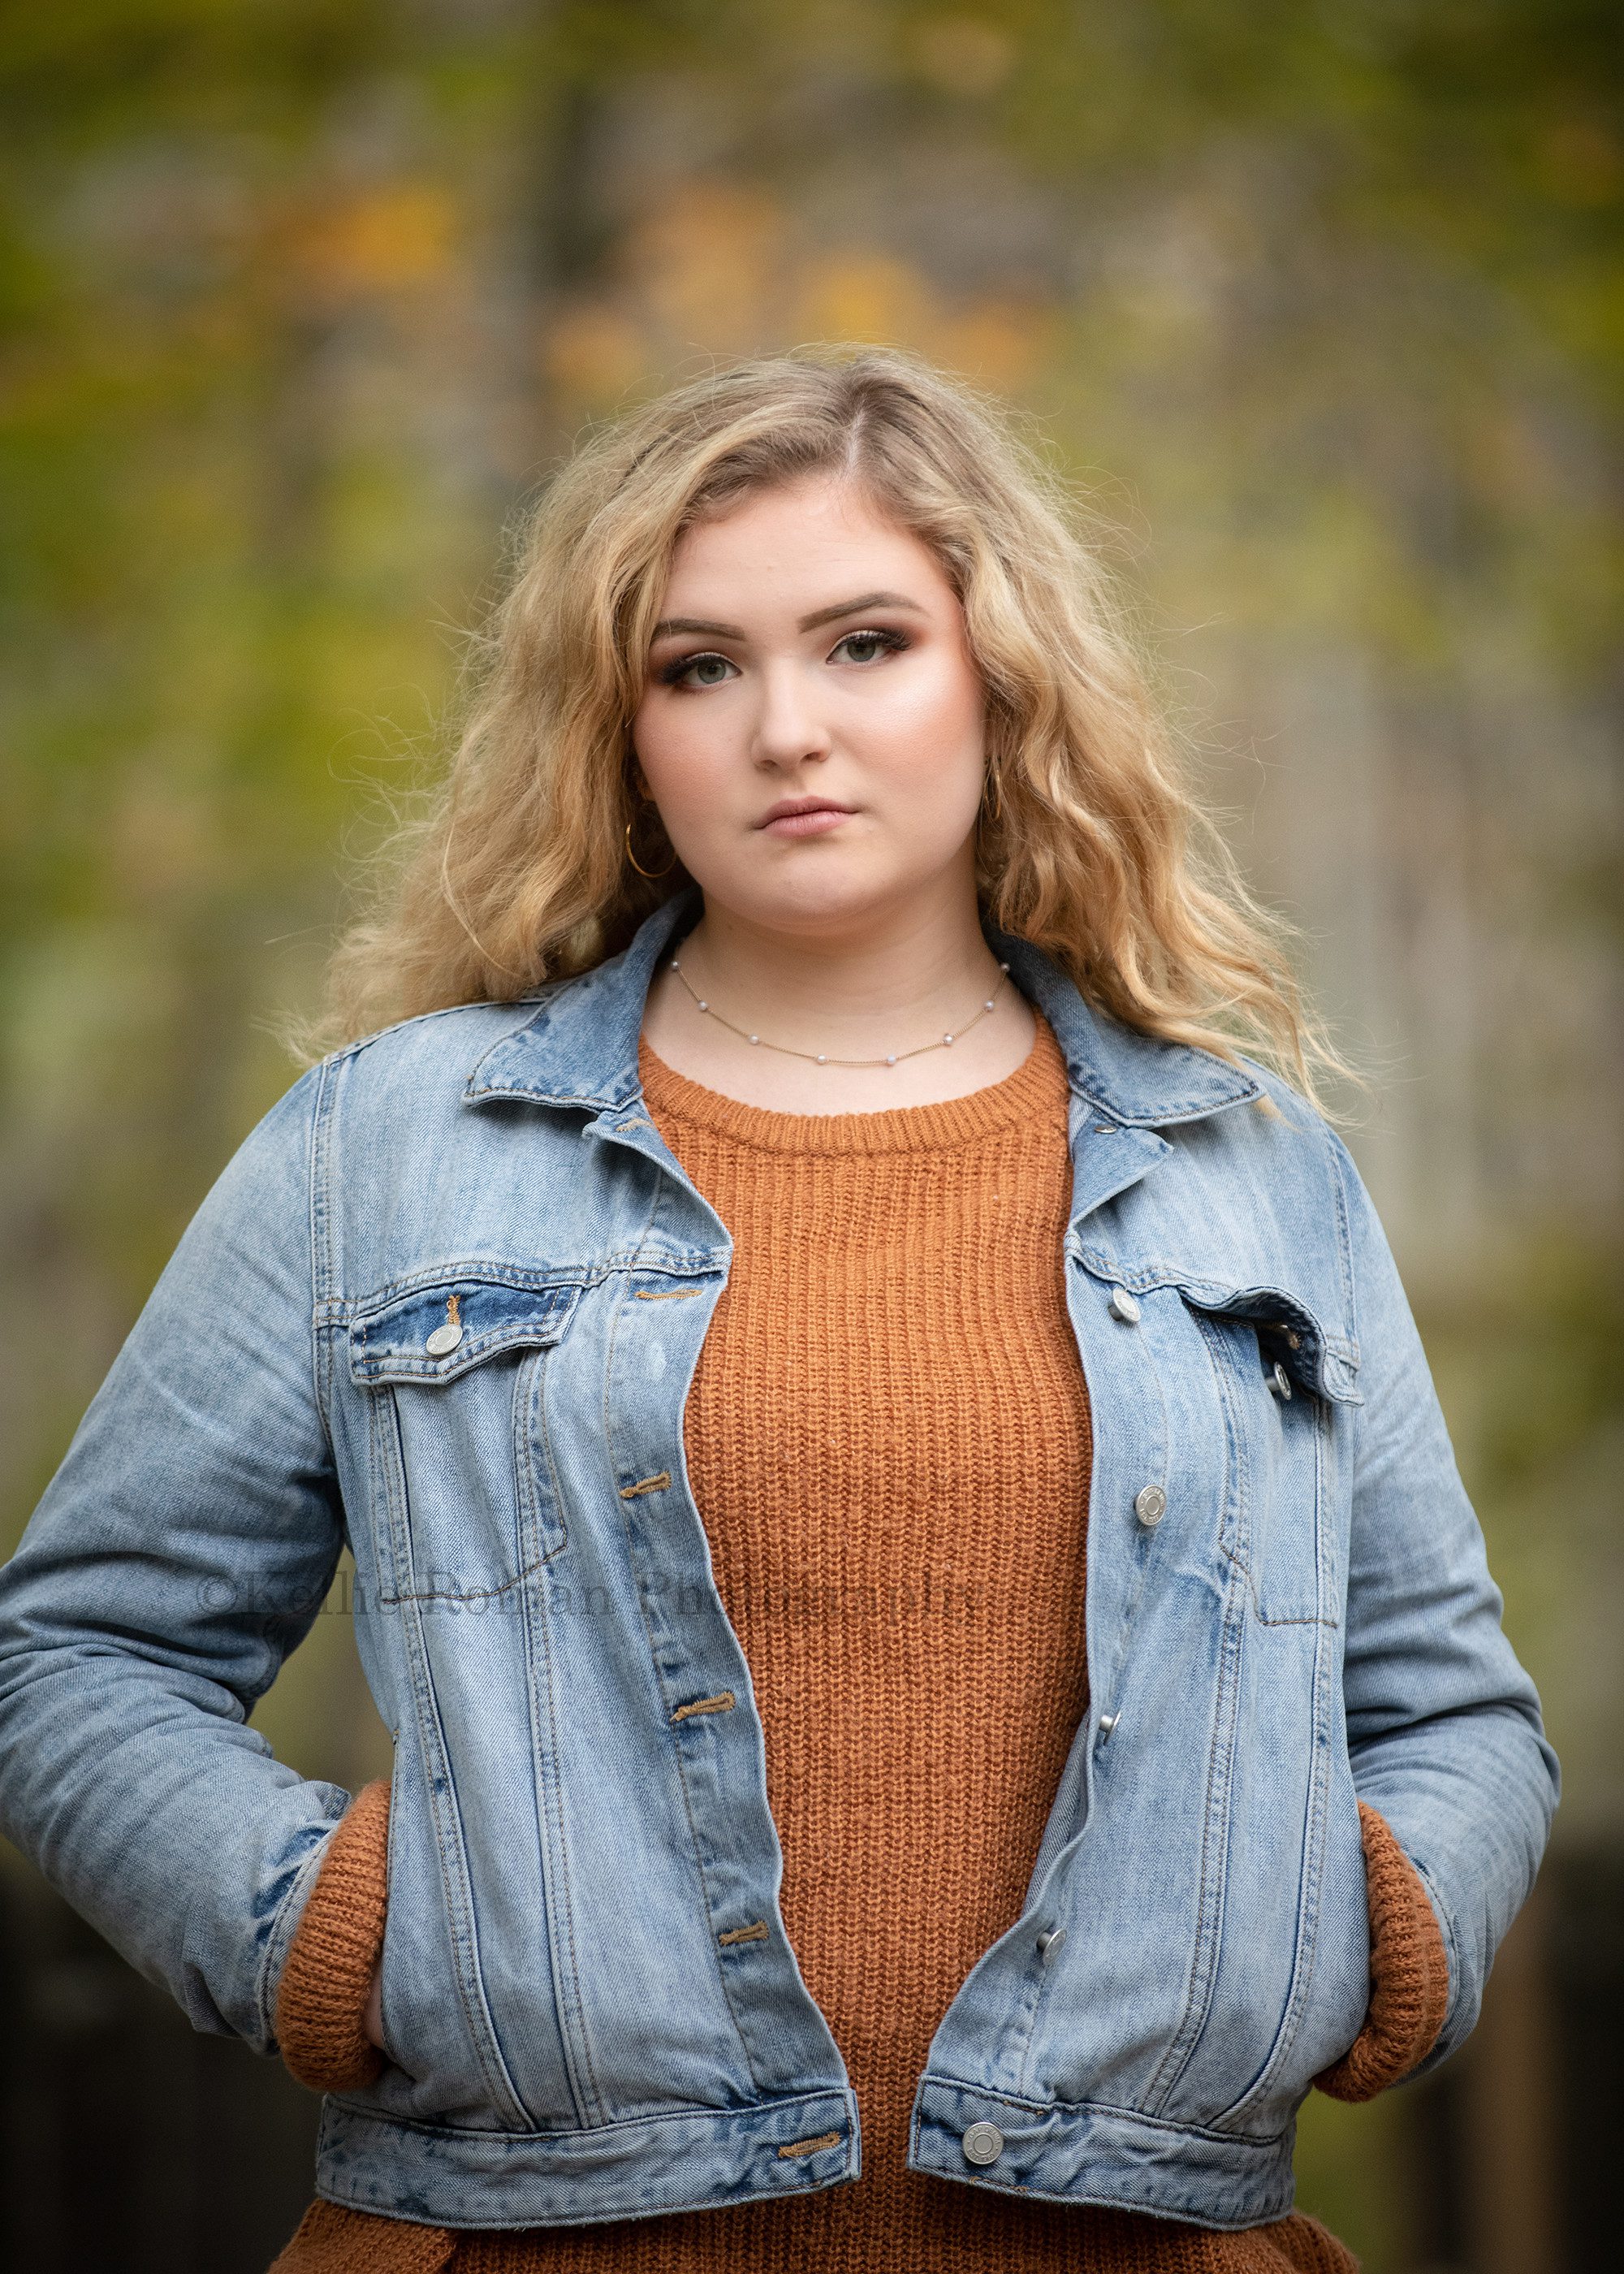 milwaukee senior photographer a young girl looking into the camera with a senior face she is blonde curly hair and blue eyes she's wearing a jean jacket with an orange ribbed sweater underneath she has both hands in her pockets